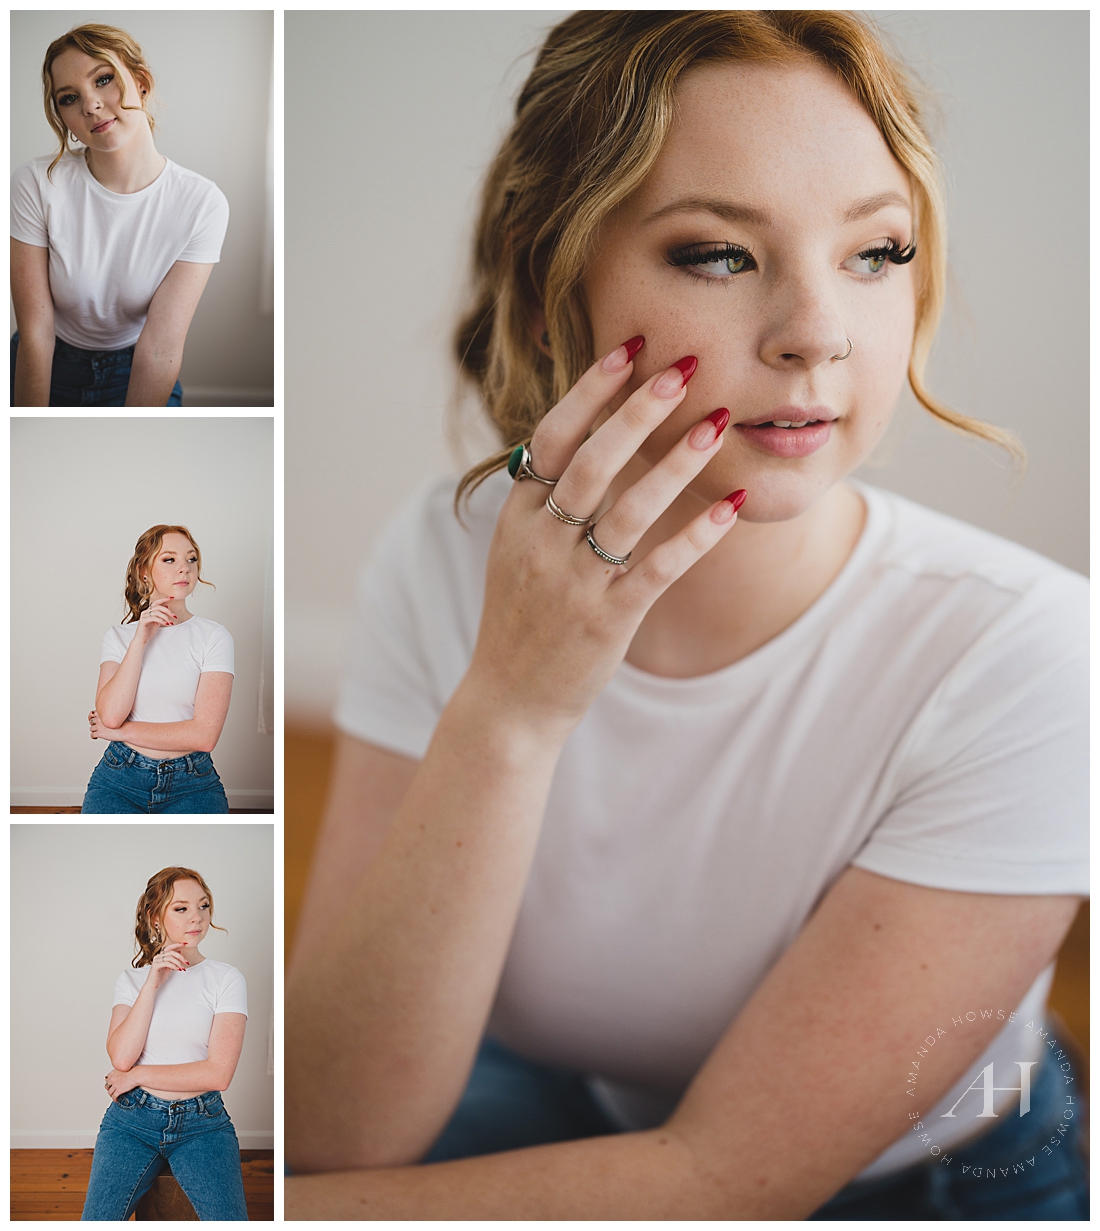 Classic Senior Portraits with a White T-Shirt and Jeans | Indoor Senior Portraits, Pose Ideas for Senior Girls  | Photographed by the Best Tacoma Senior Portrait Photographer Amanda Howse Photography